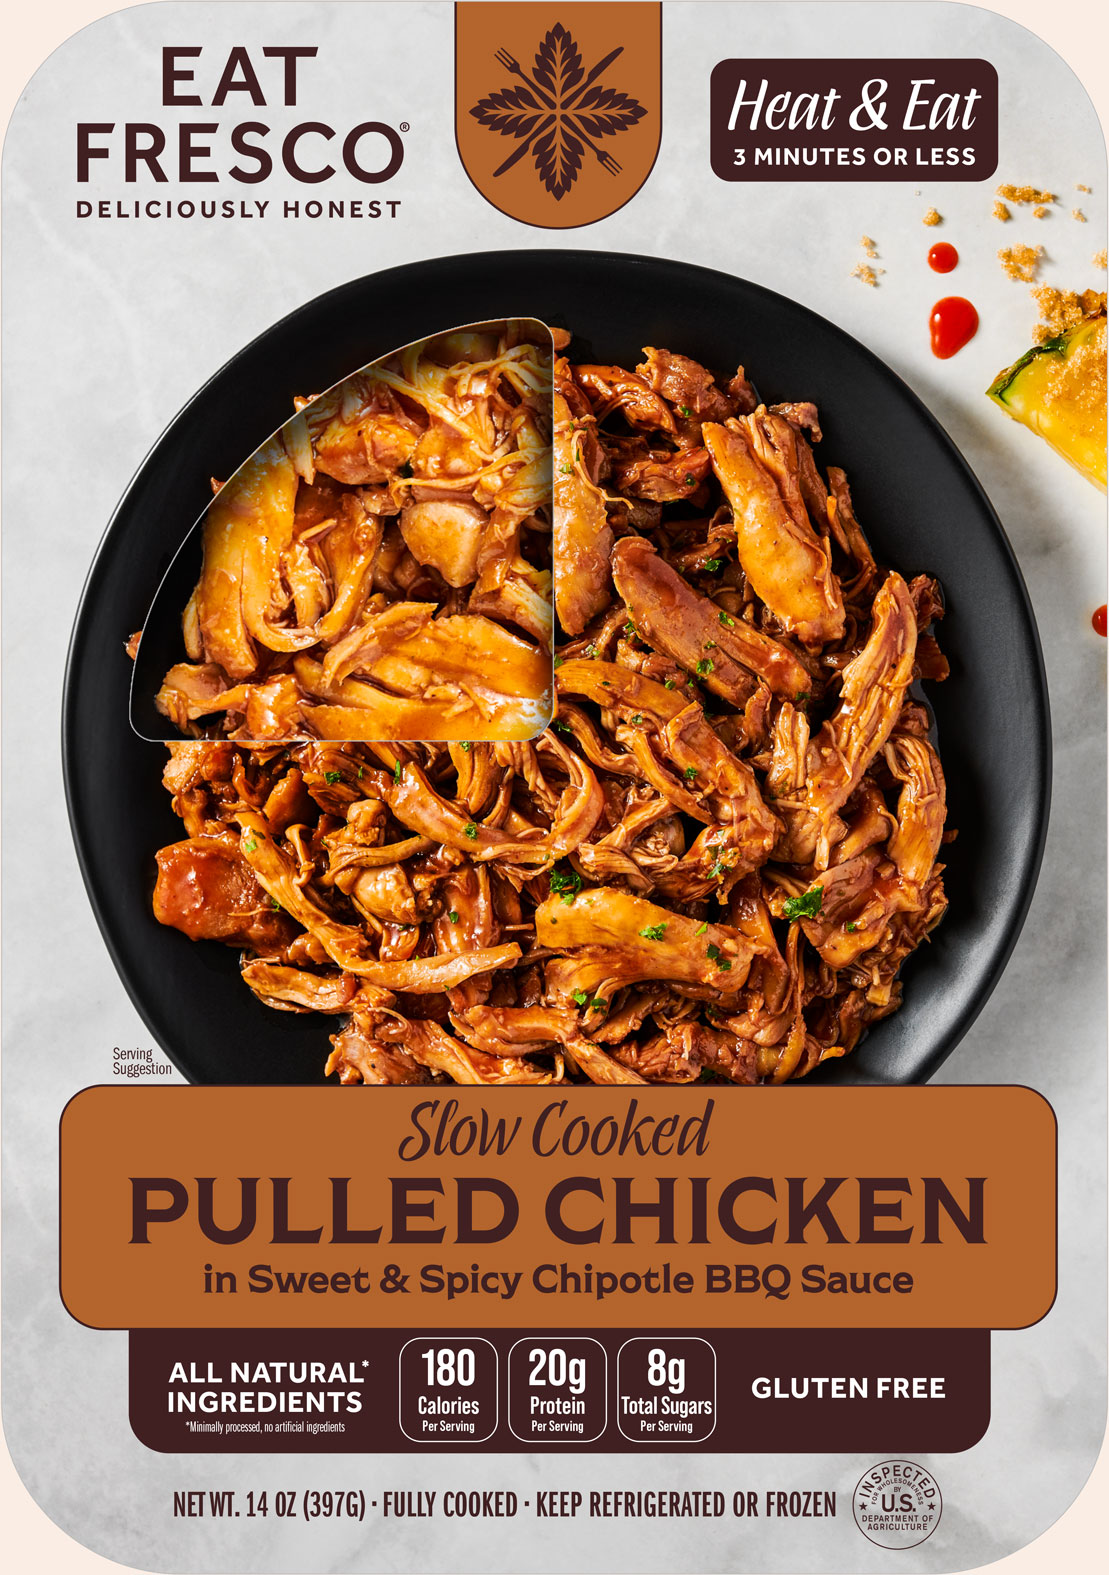 Slow Cooked Pulled Chicken